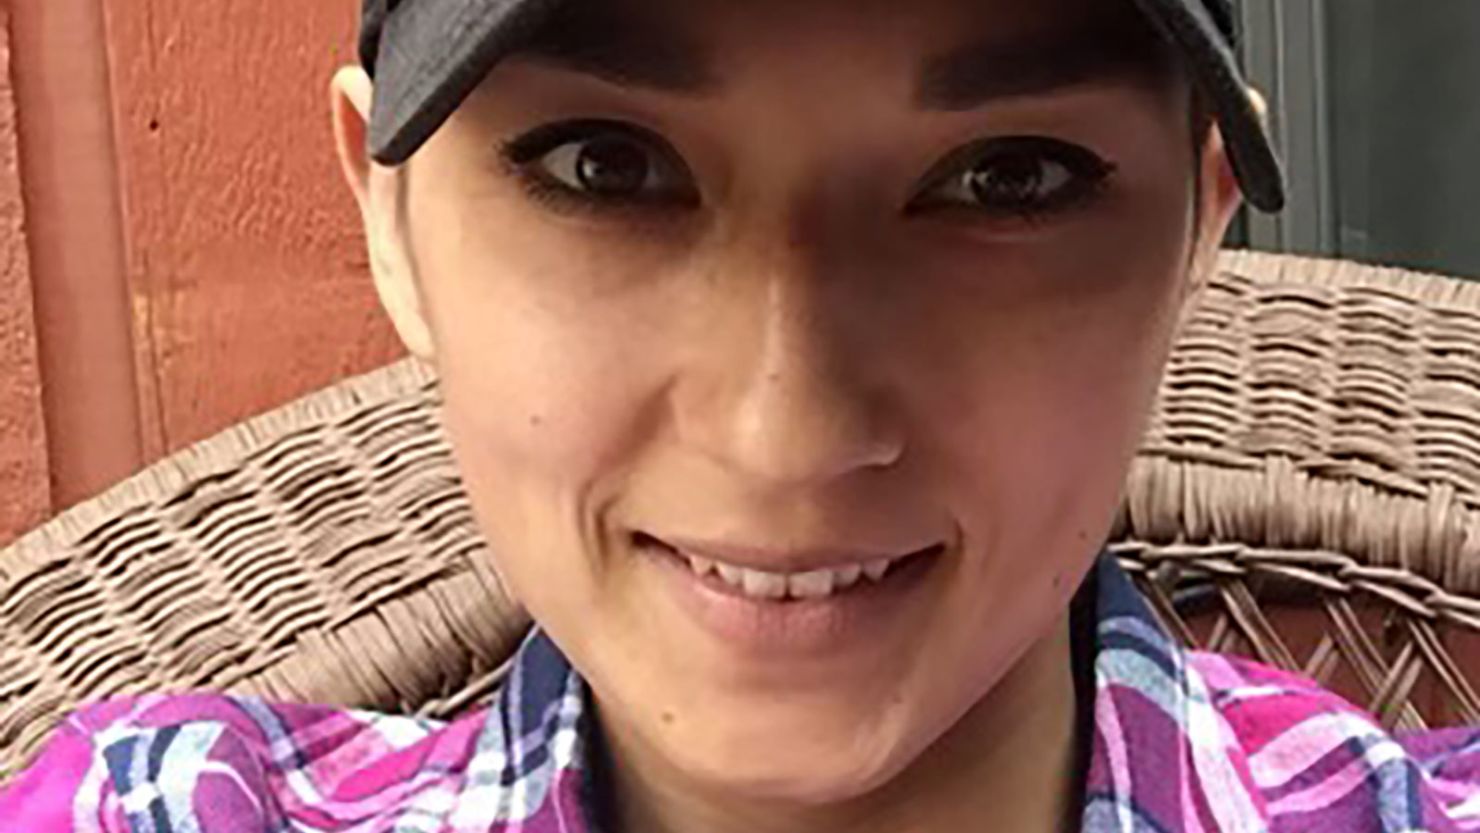 Kailani Greenwood in May 2018, while undergoing chemotherapy for Hodgkin lymphoma.